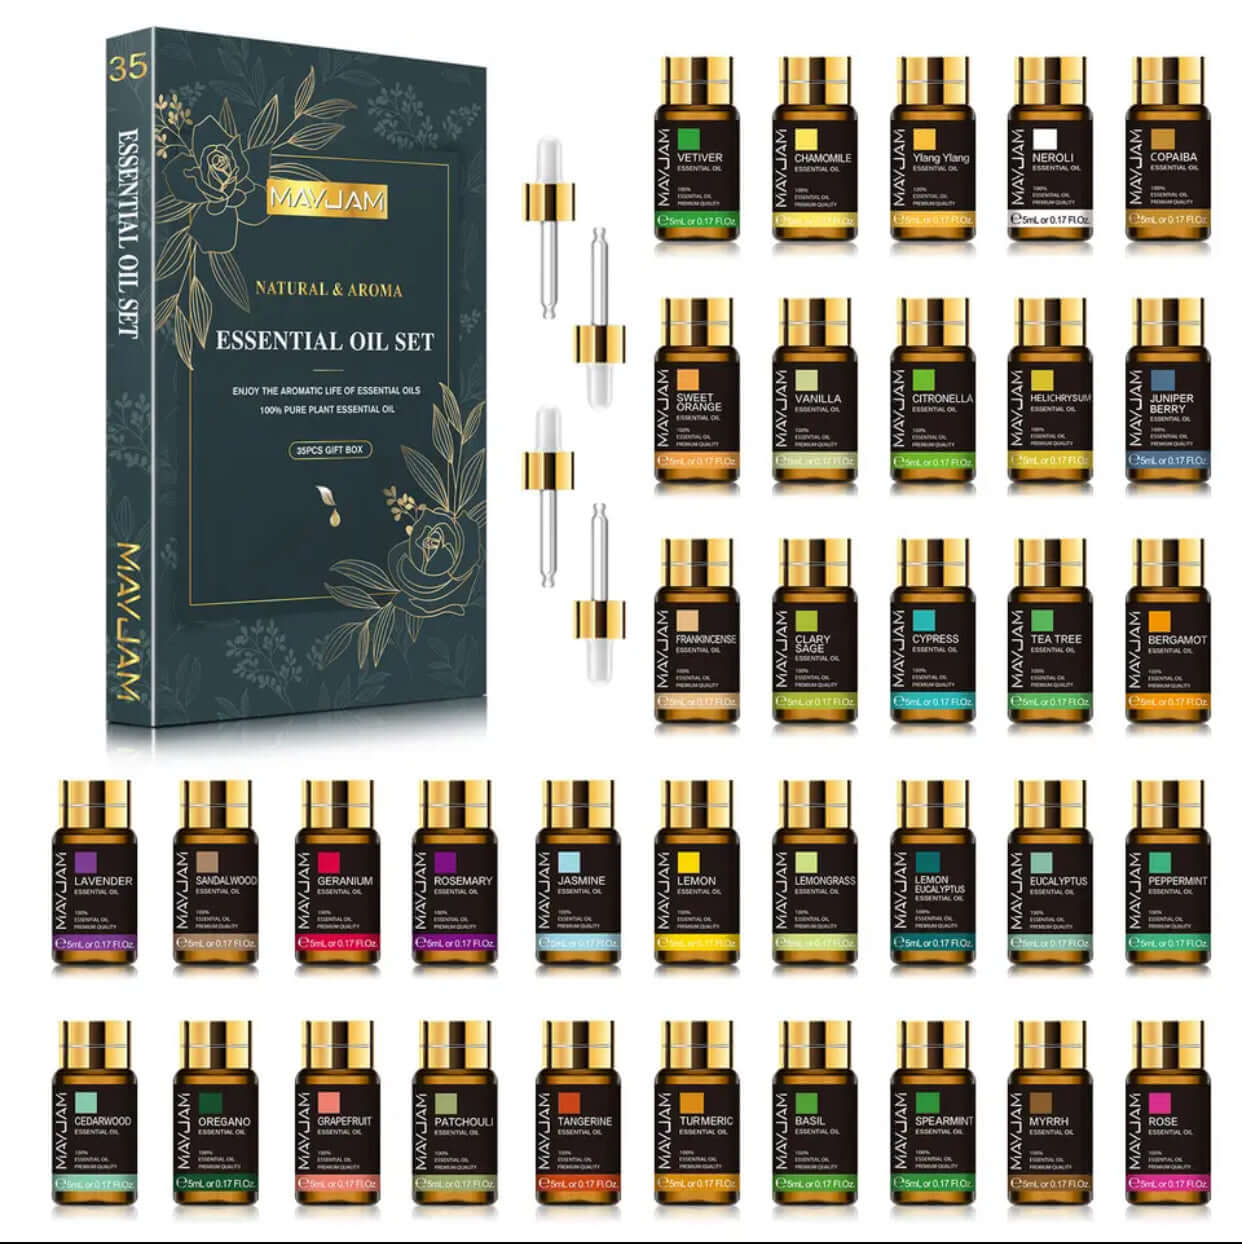 MAYJAM essential oil set - 35 bottles as a gift set - for humidifiers, diffusers, DIY perfume and much more